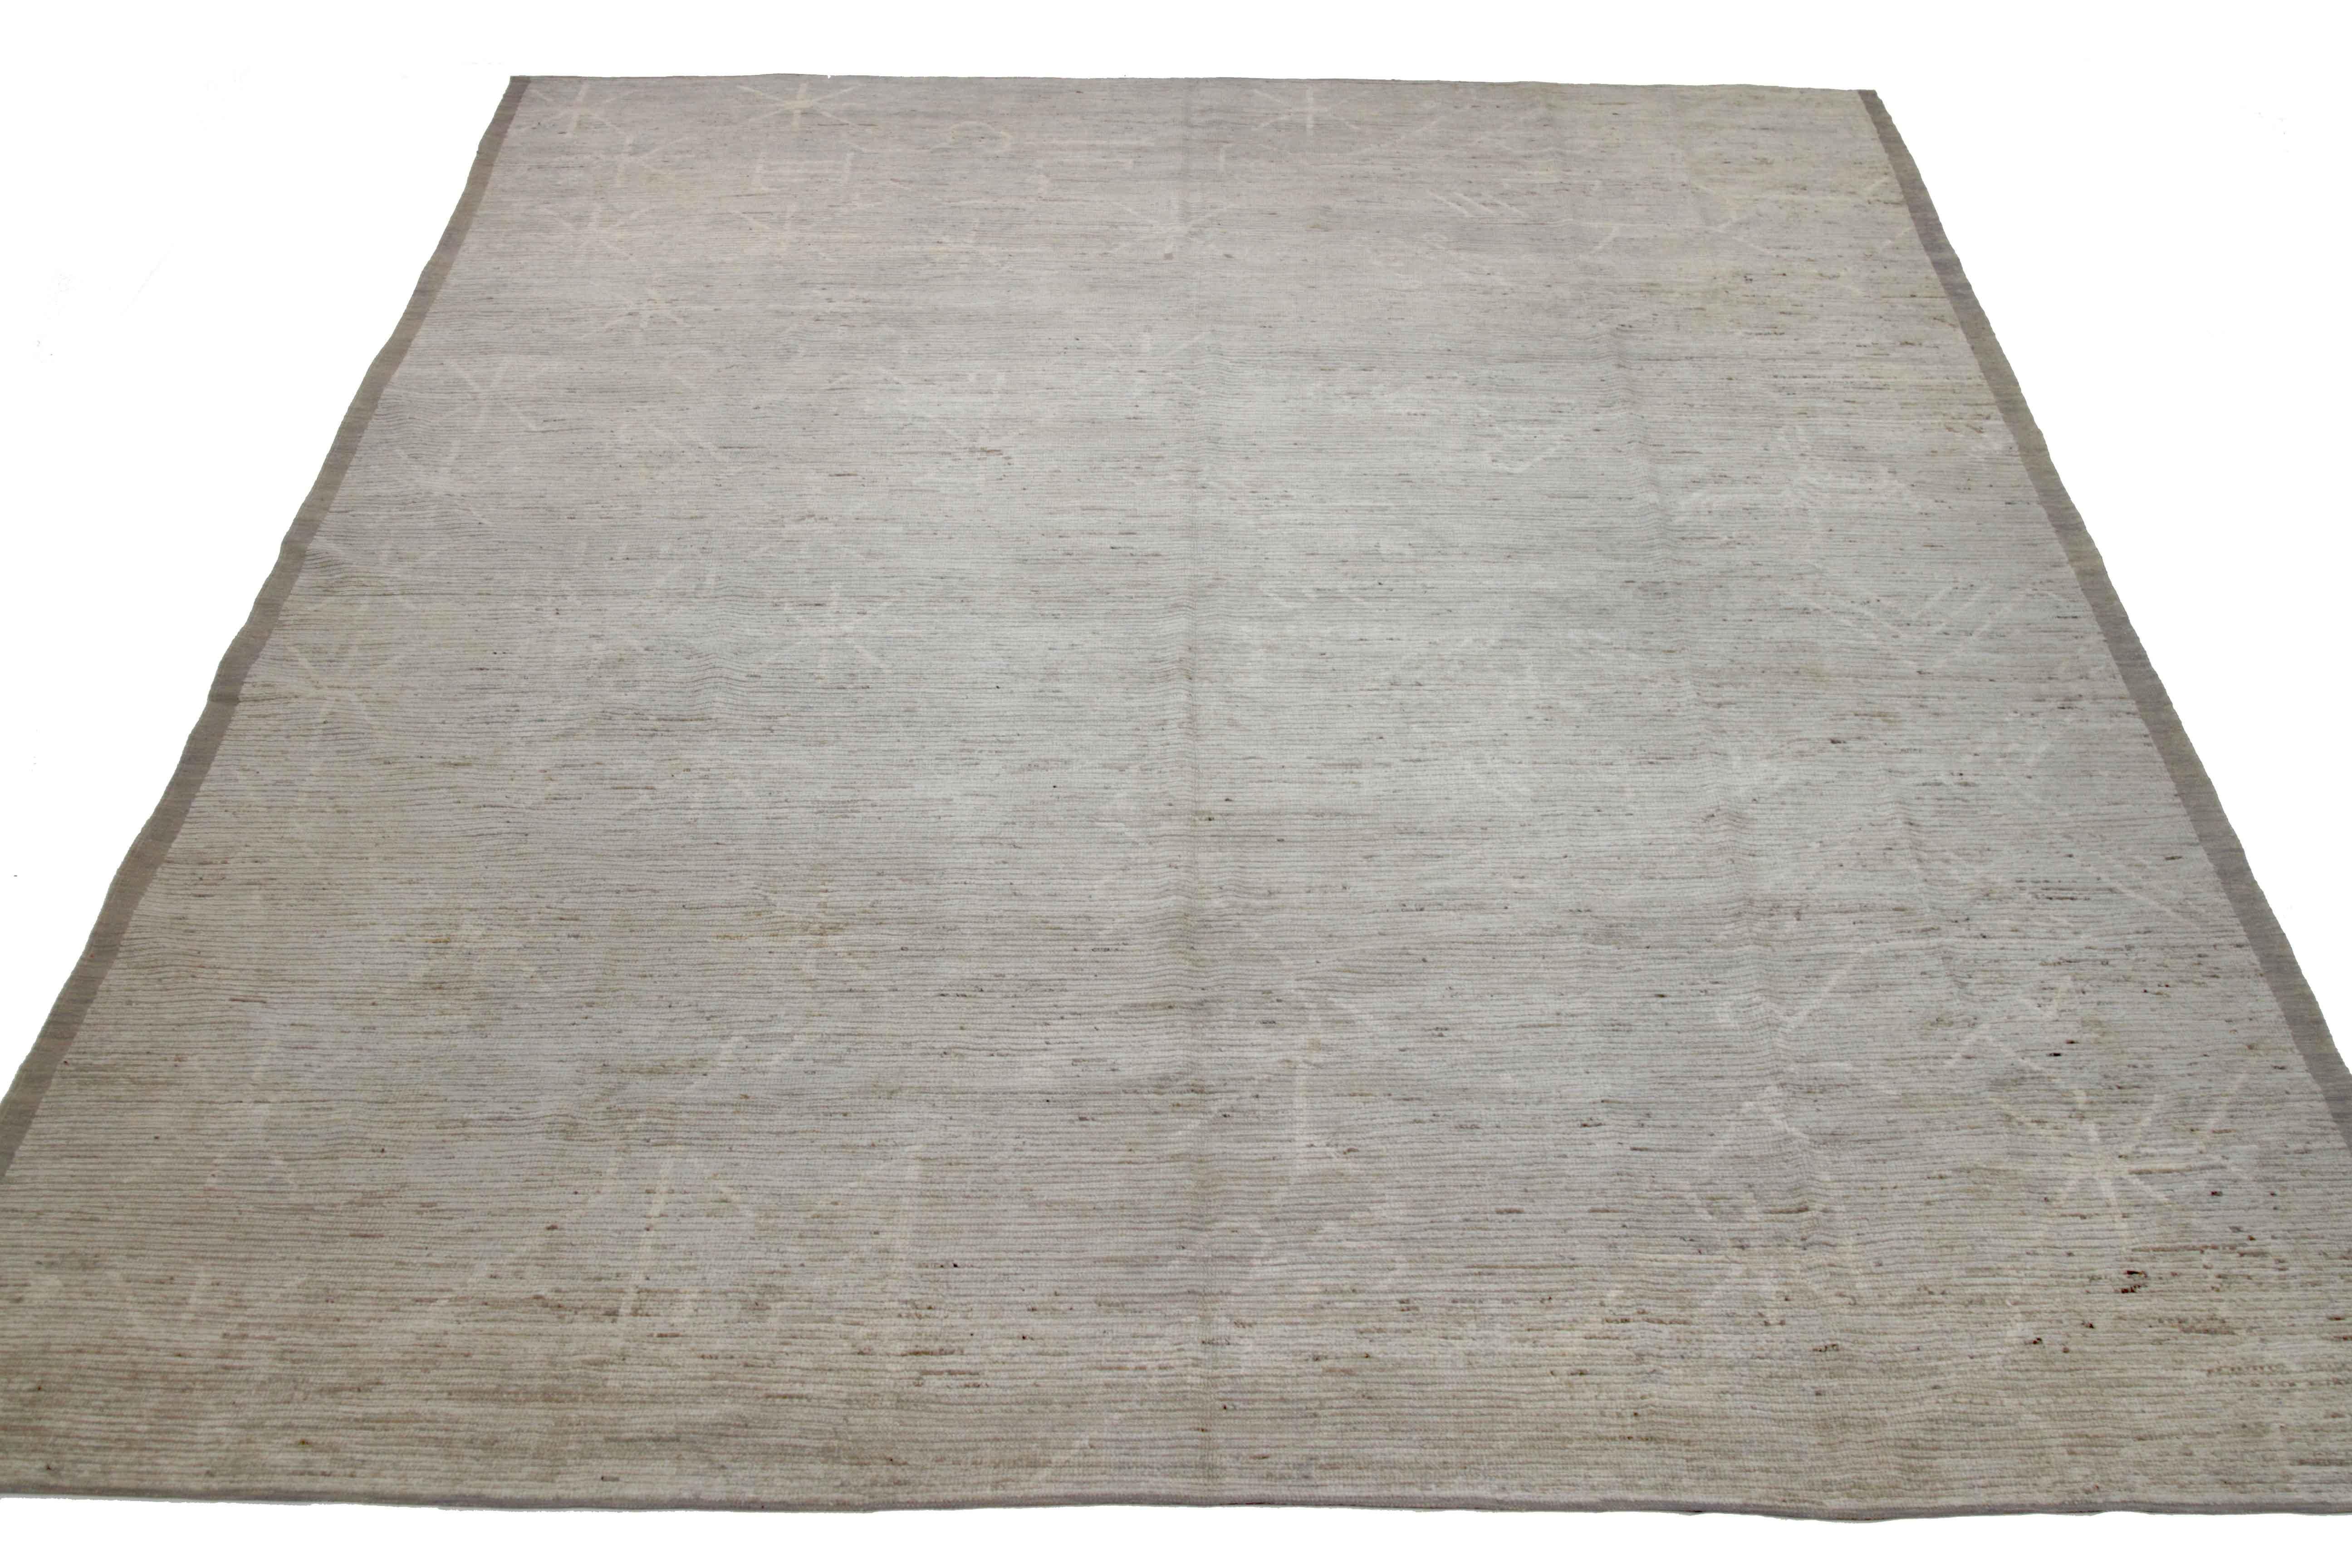 Modern Afghan rug handwoven from the finest sheep’s wool. It’s colored with all-natural vegetable dyes that are safe for humans and pets. This piece is a traditional Afghan weaving featuring a Moroccan inspired design. It’s highlighted by ivory